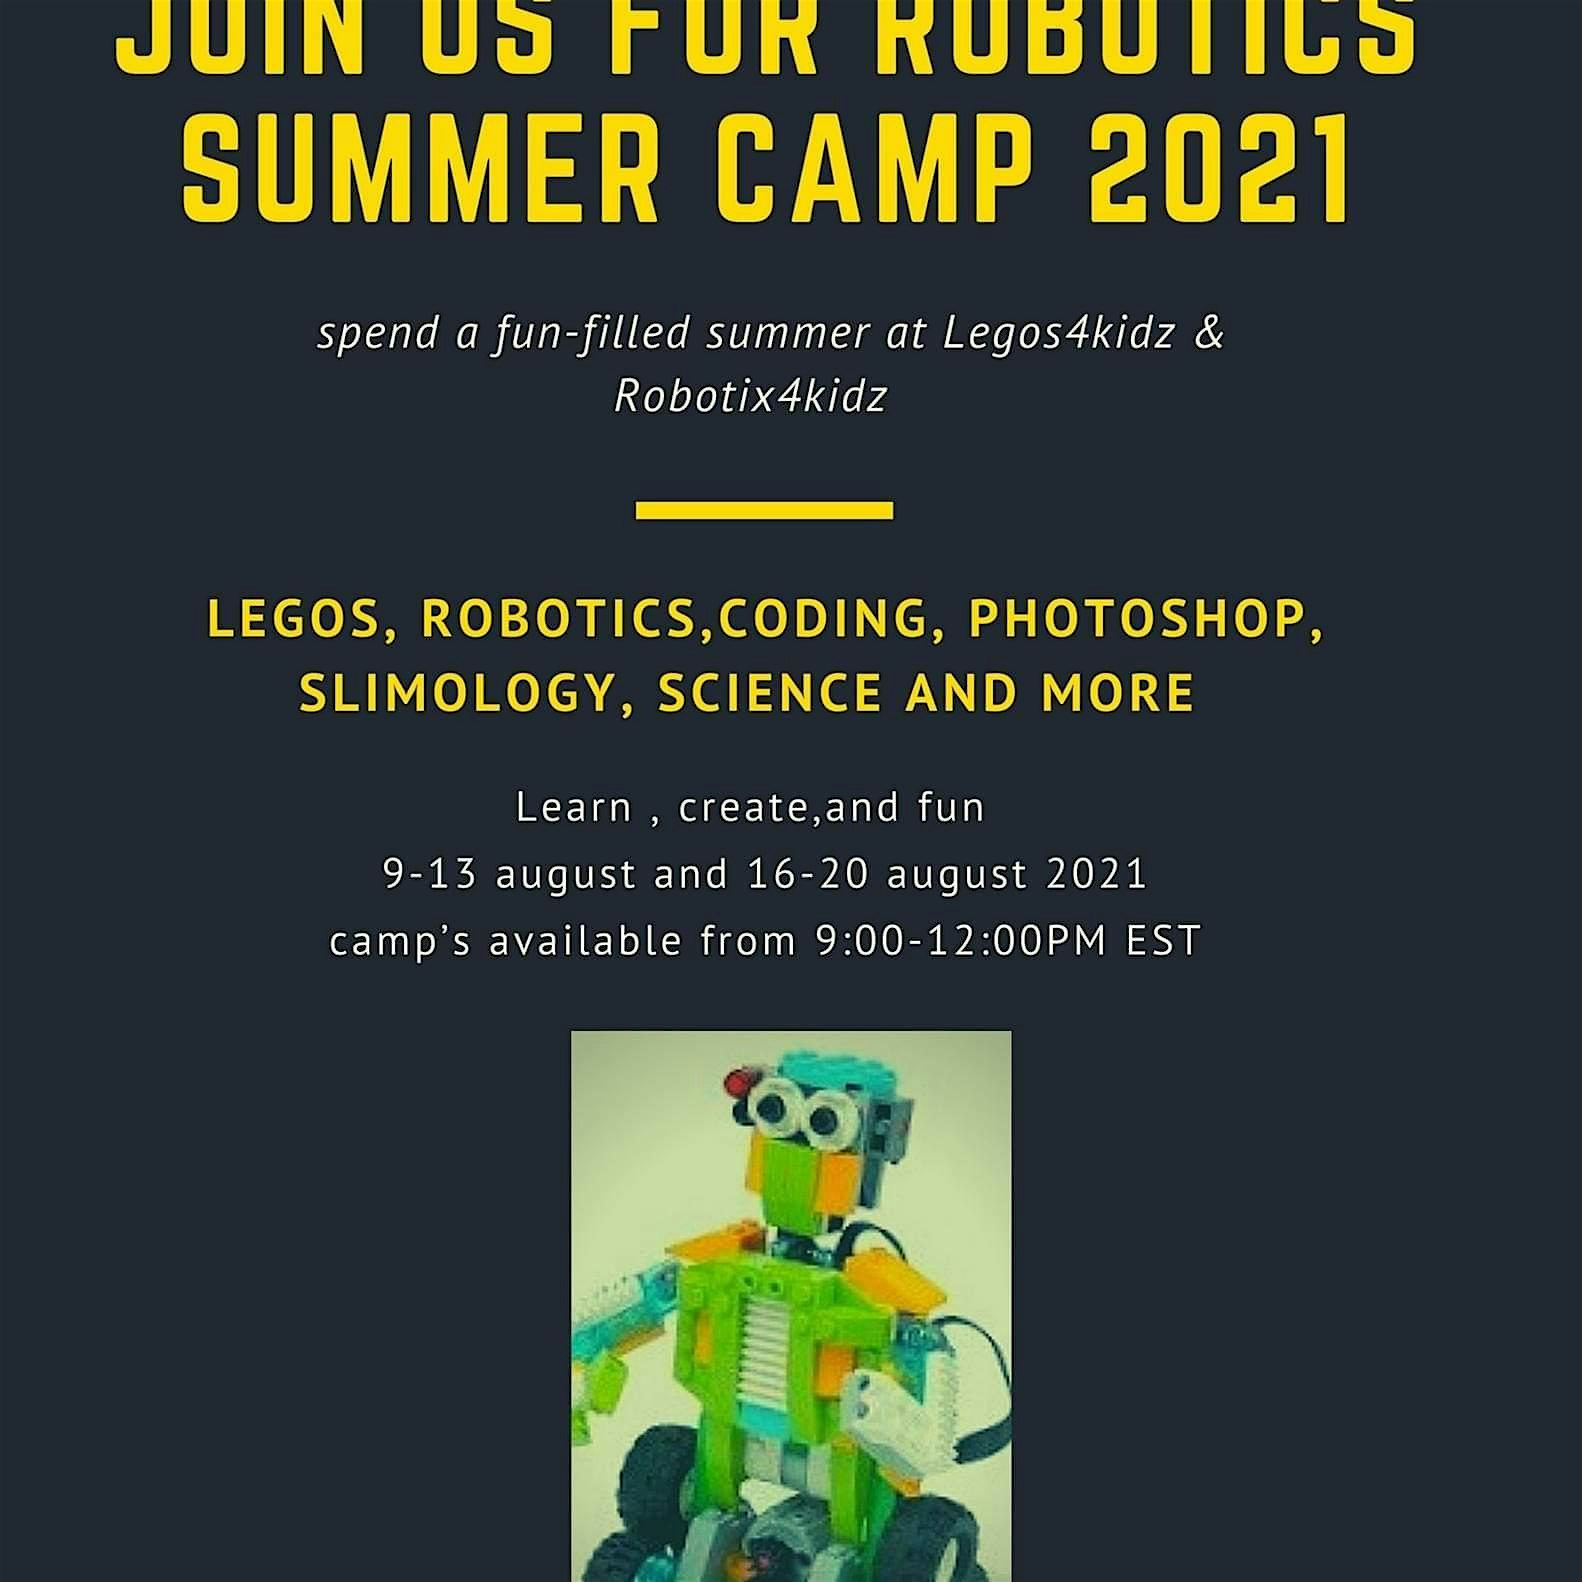 Lego camp ages 4-7/8-12